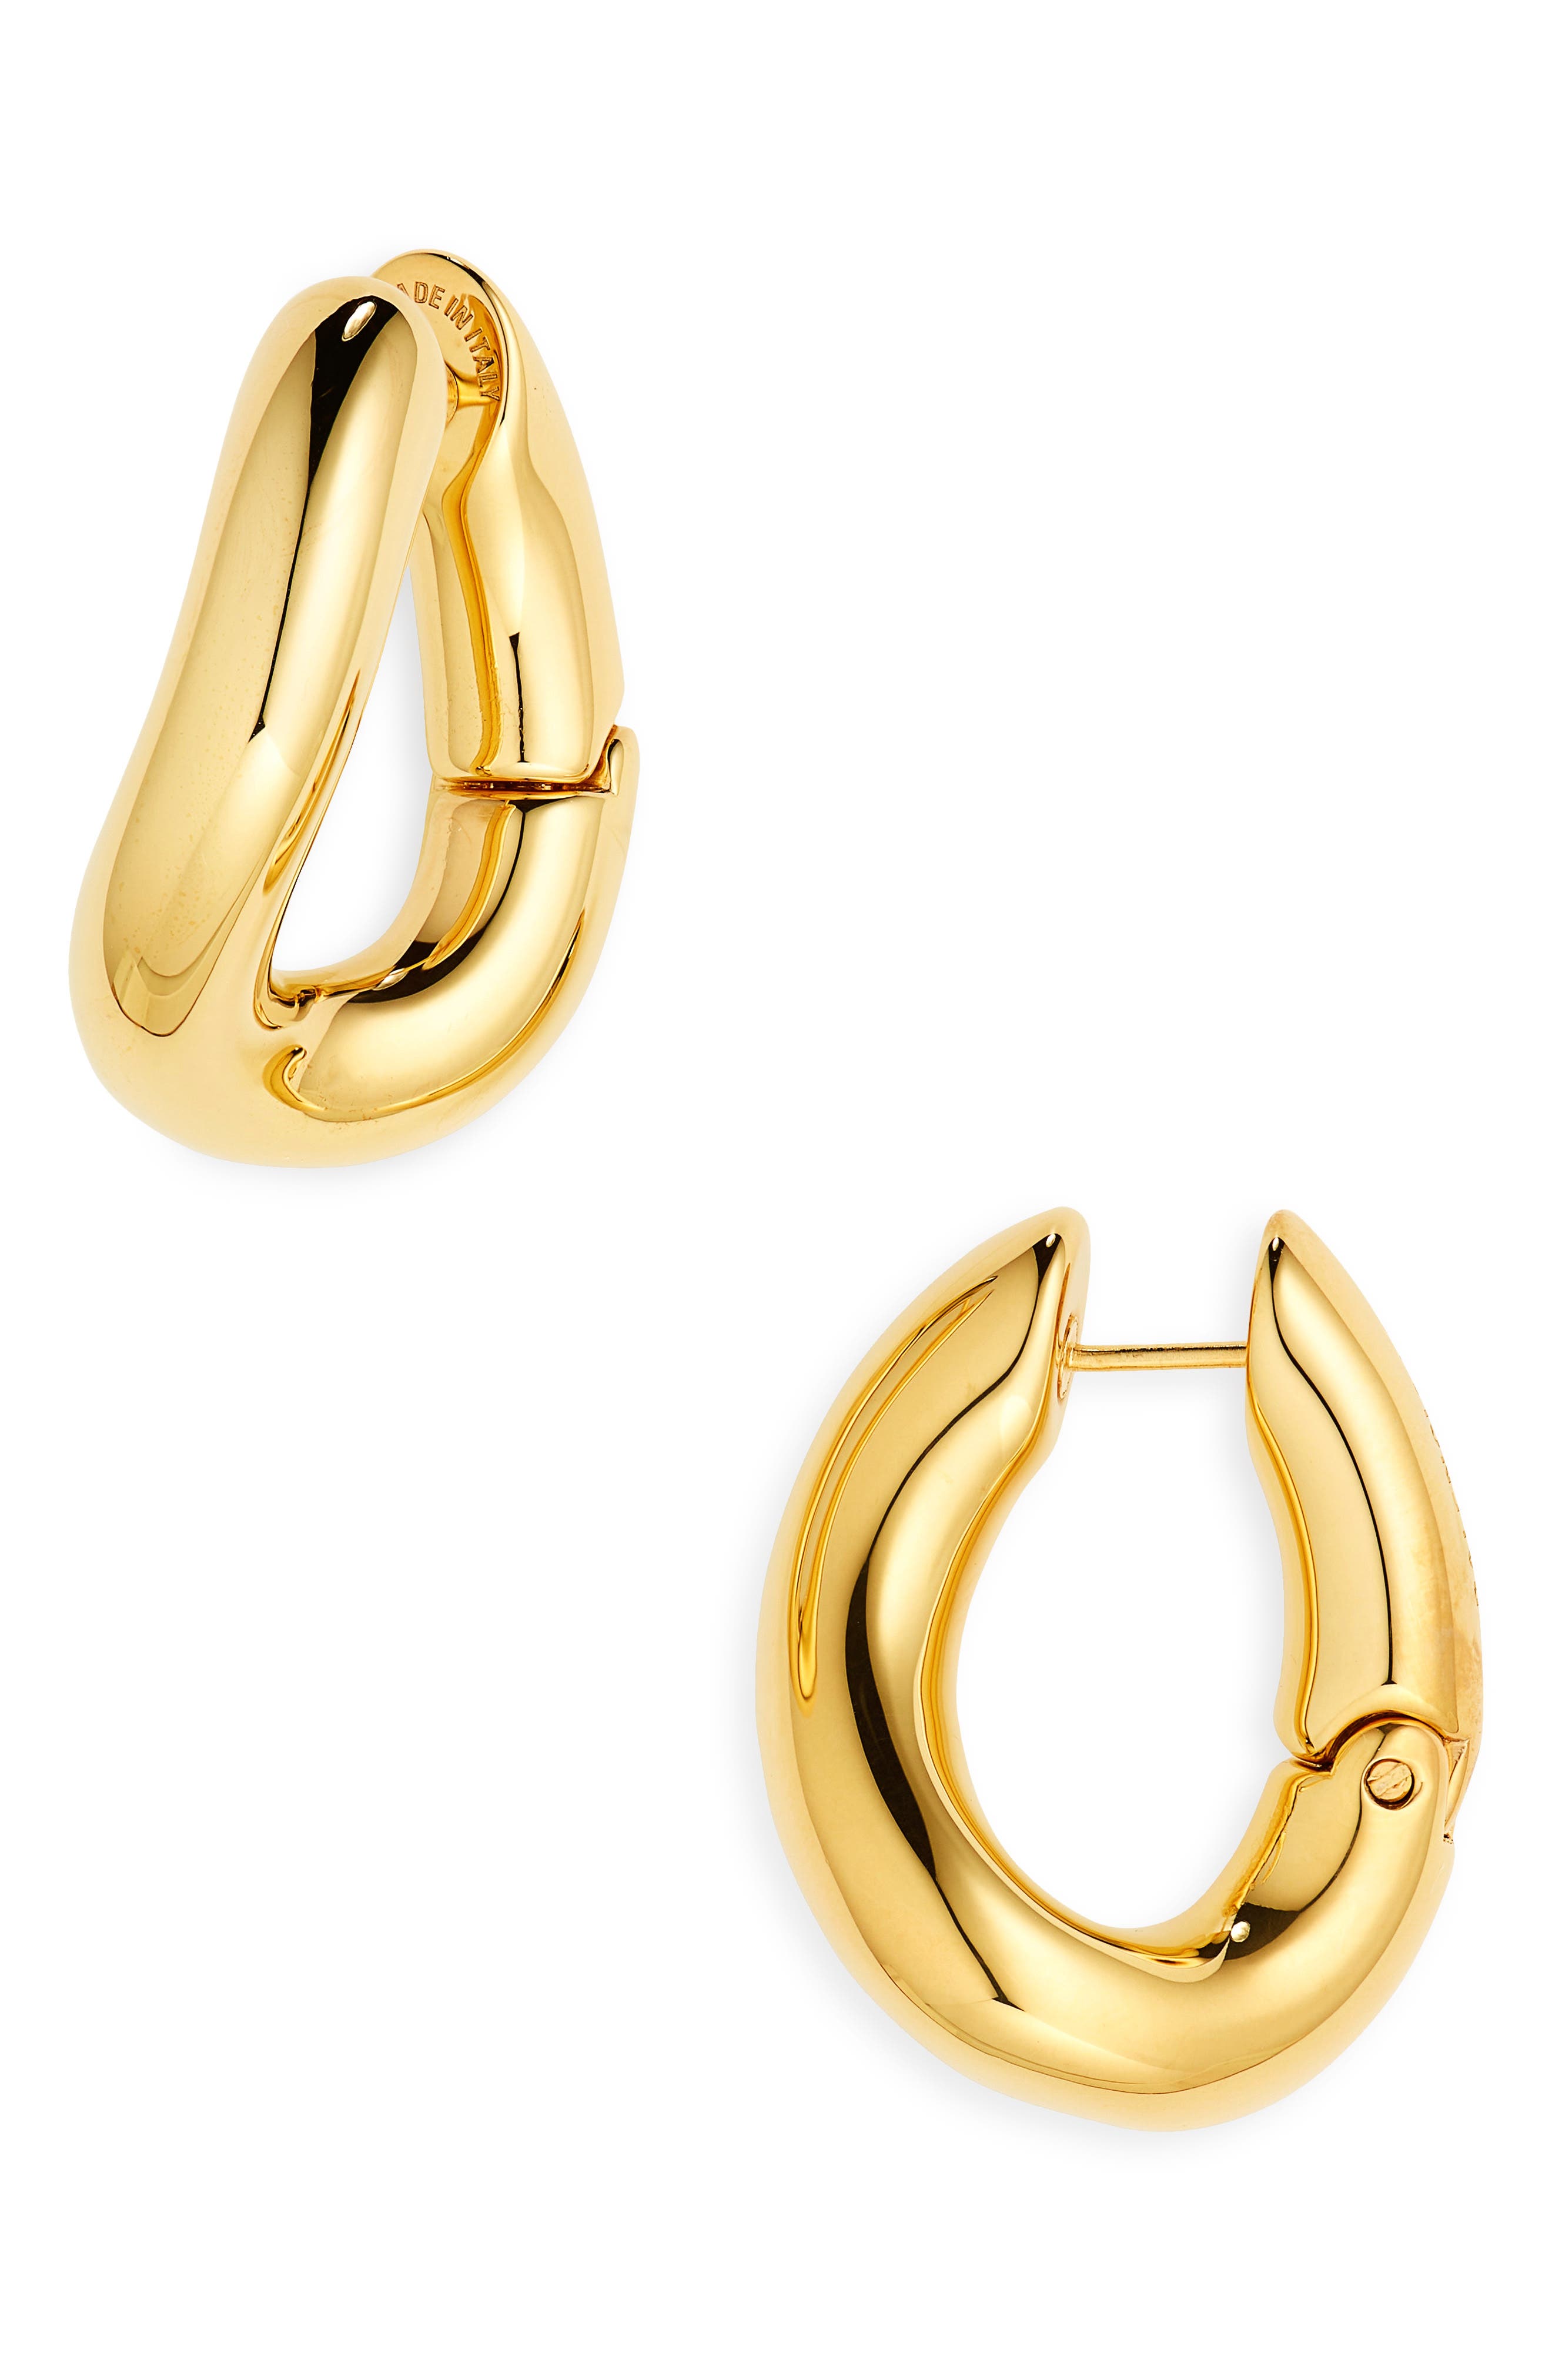 Balenciaga Hoop Earrings in Shiny Gold at Nordstrom